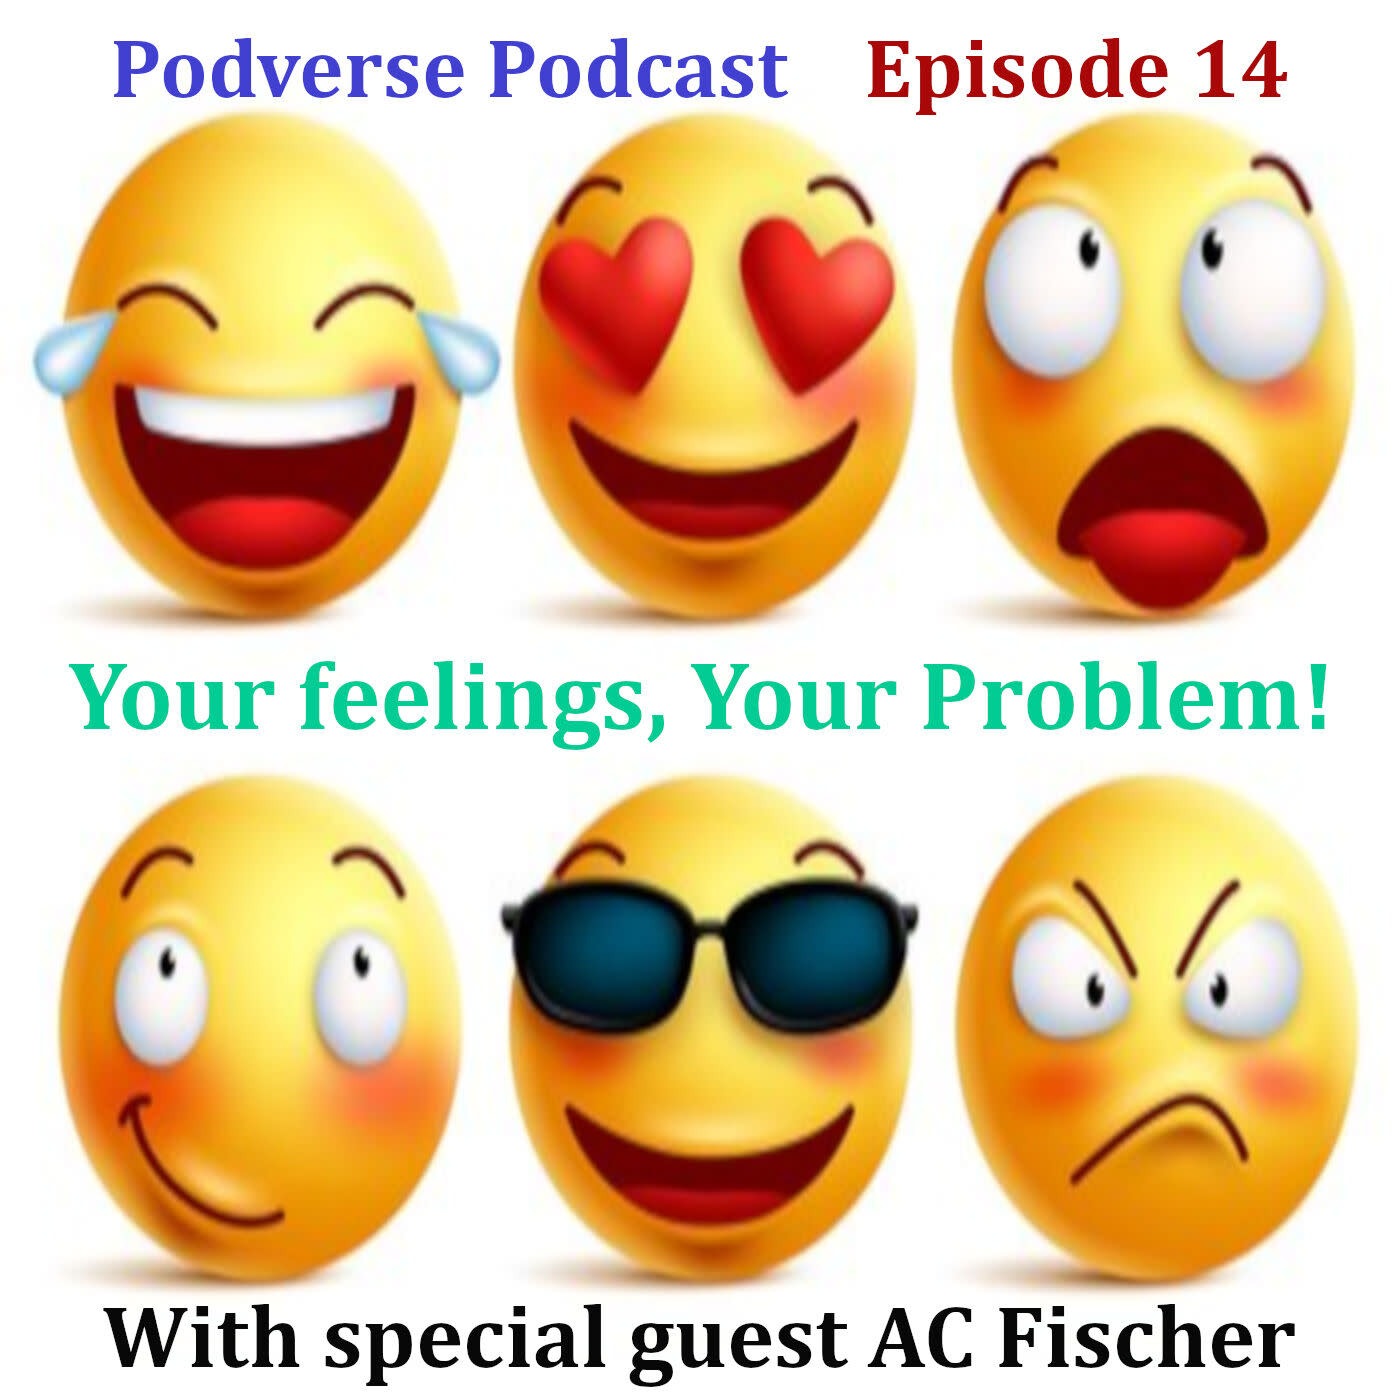 Your feelings, Your problem! - Episode 14